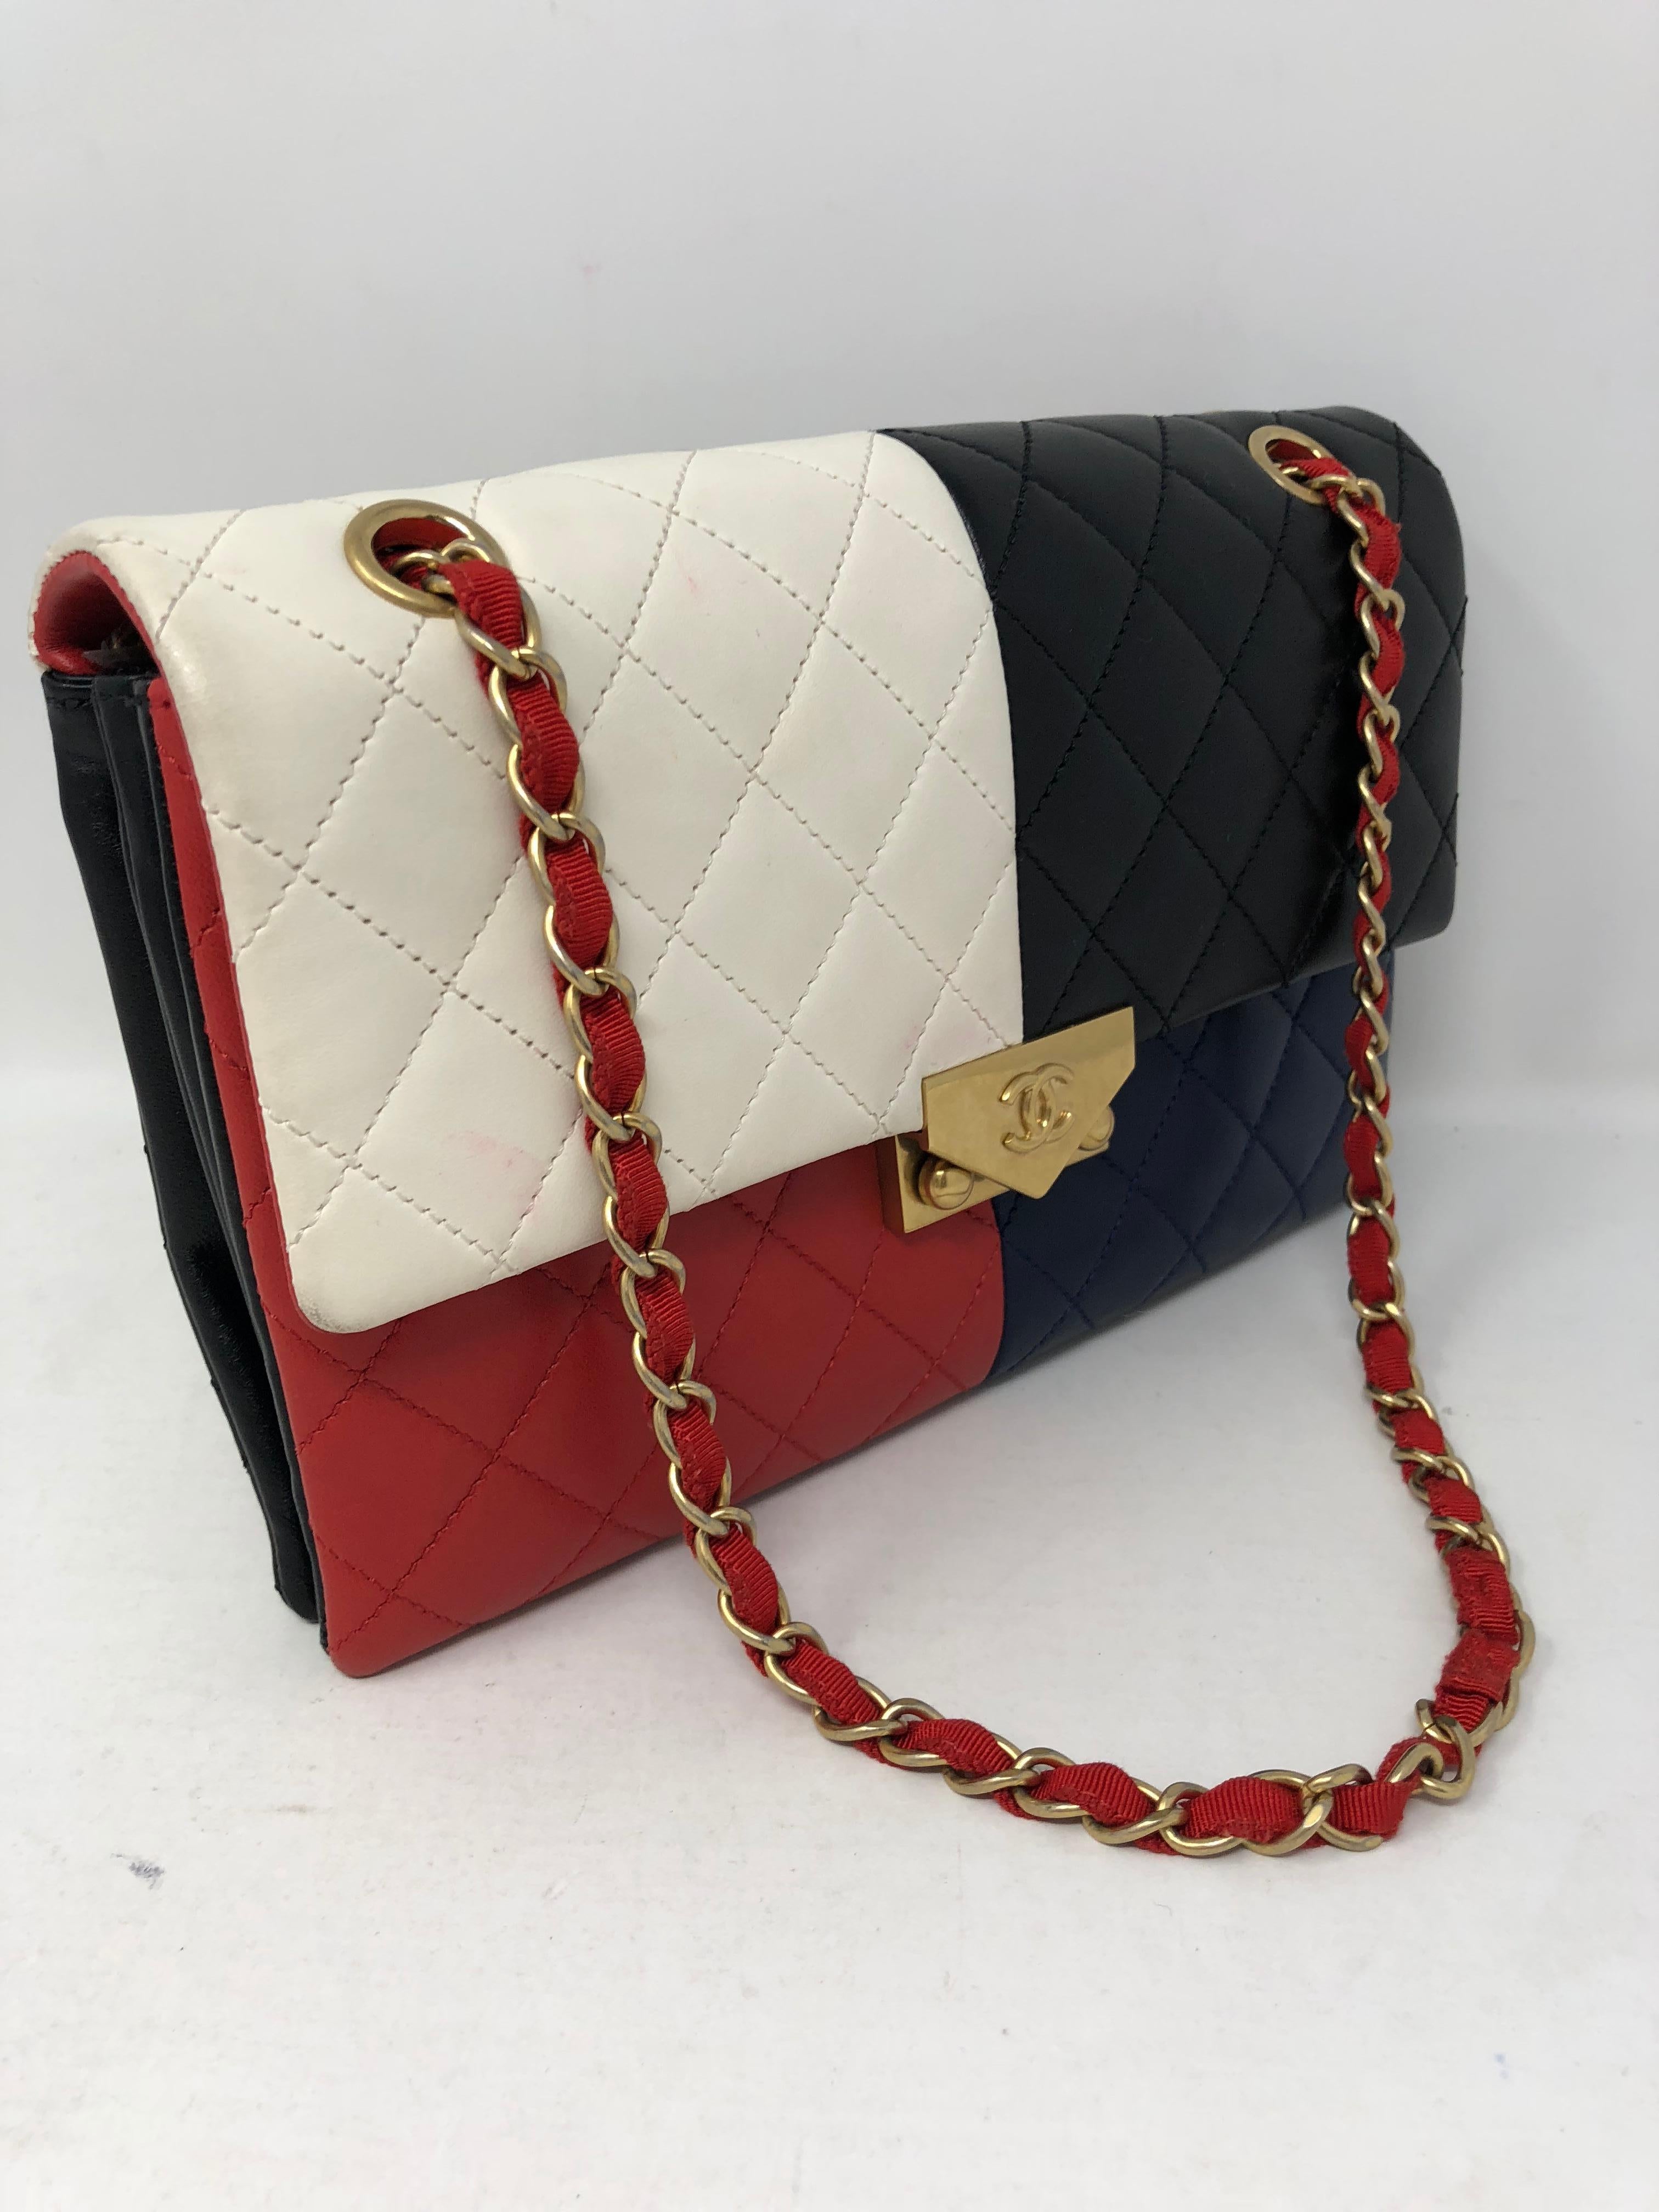 Chanel Multi-Color Block Clutch/ Bag. Can be worn longer or doubled. Envelope clutch size. Beautiful lambskin leather in red, white, black, and navy. Unique piece by Chanel. Authenticity card included with dust cover. Guaranteed authentic. 